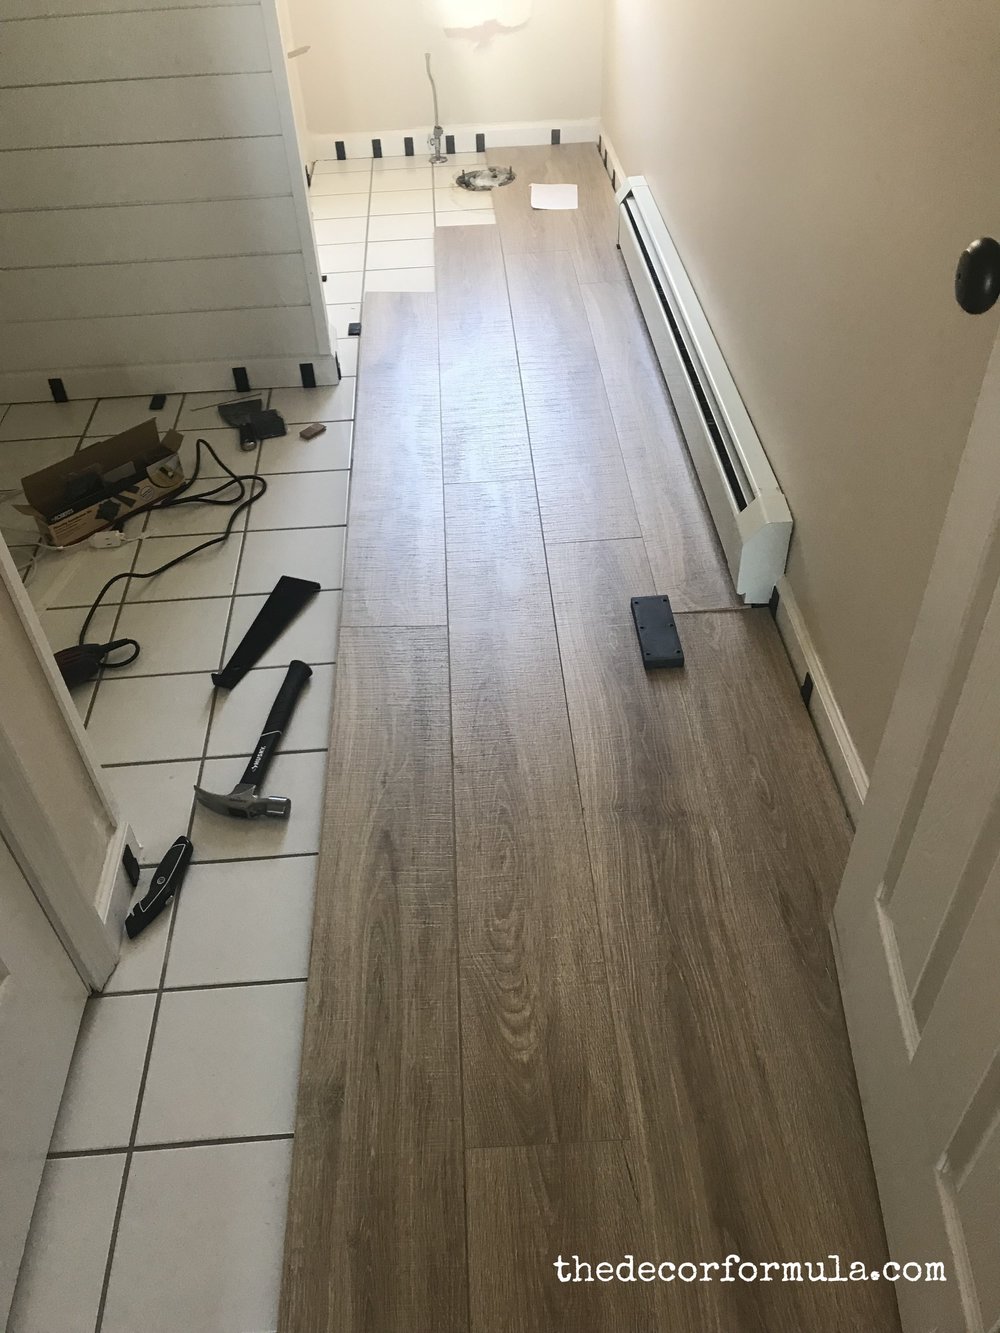 Ideas For Covering Up Tile Floors, Can You Install Ceramic Tile Over Hardwood Floors